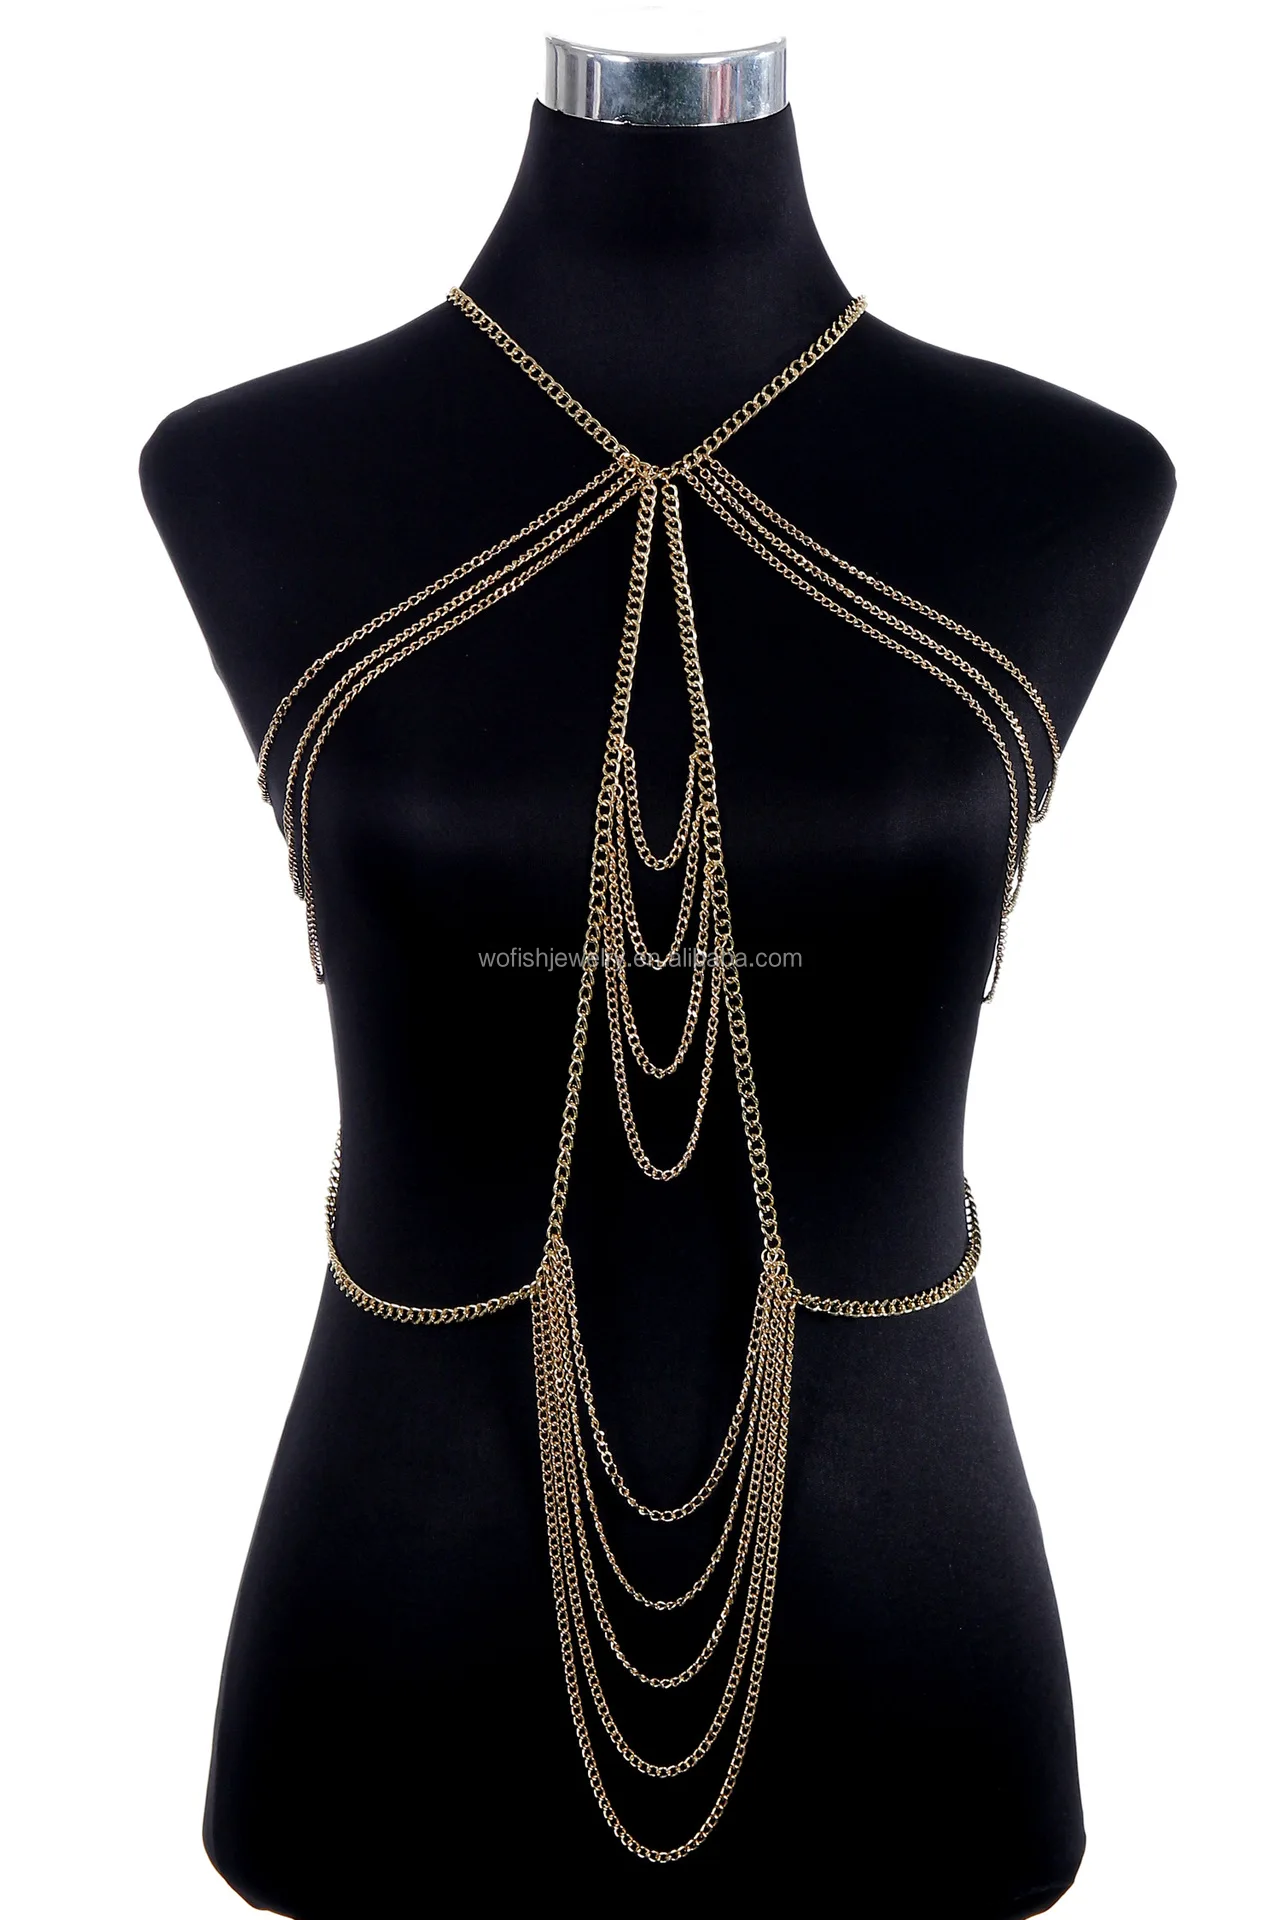 Sexy Chains Gold Body Chain Bodychain Necklace Body Jewelry Buy Gold Body Chainbodychain 9115